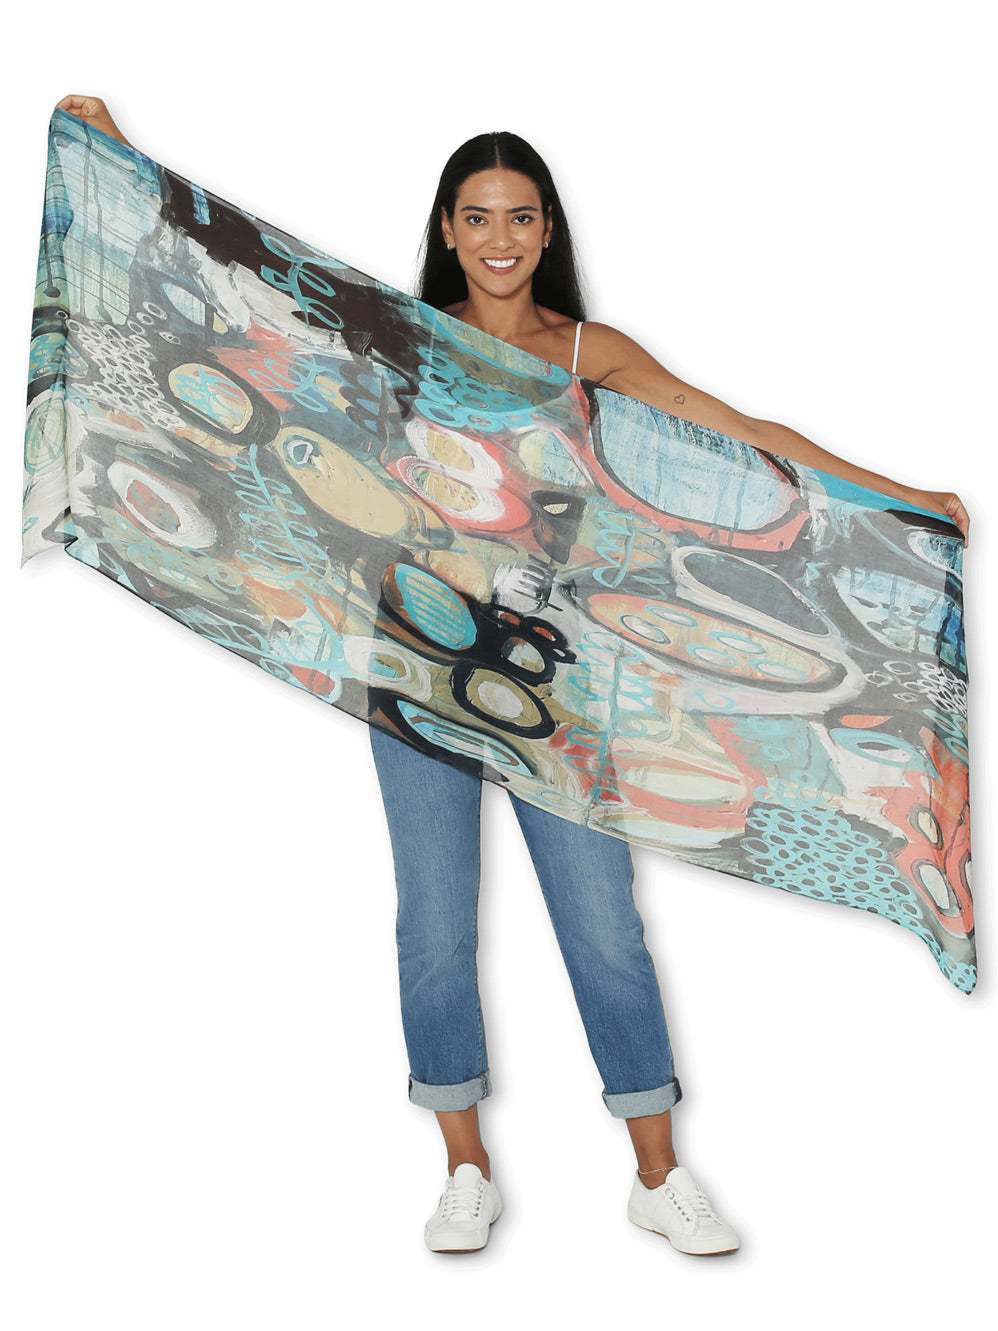 THE ARTISTS LABEL ROCK POOL SCARF